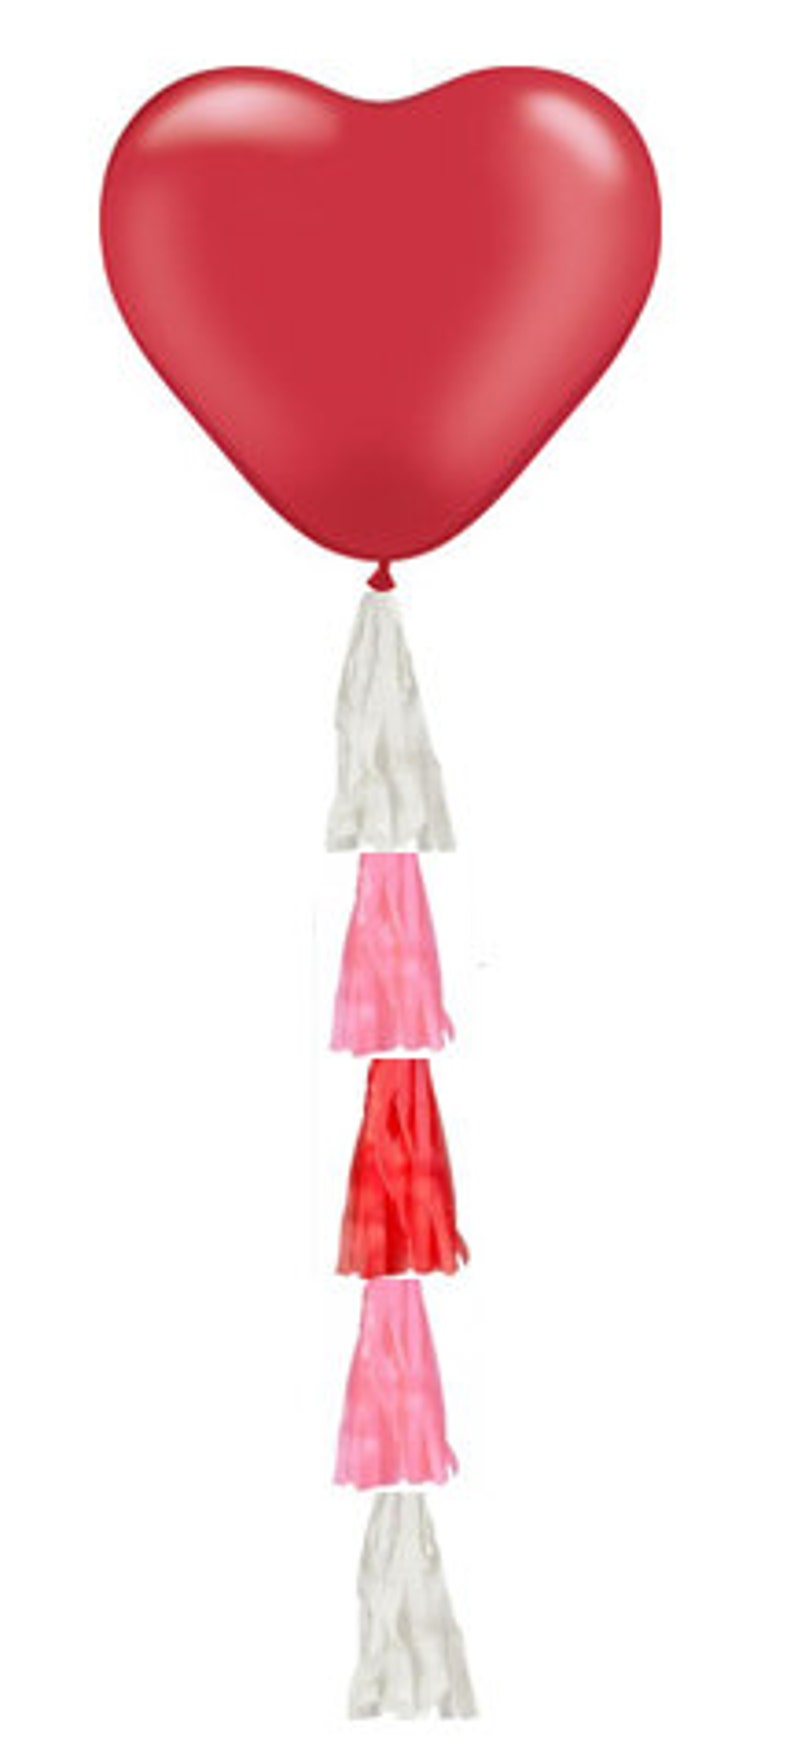 Heart Balloons with Tassels 36 Giant Balloons Valentine's Day Decor Party Supplies image 1